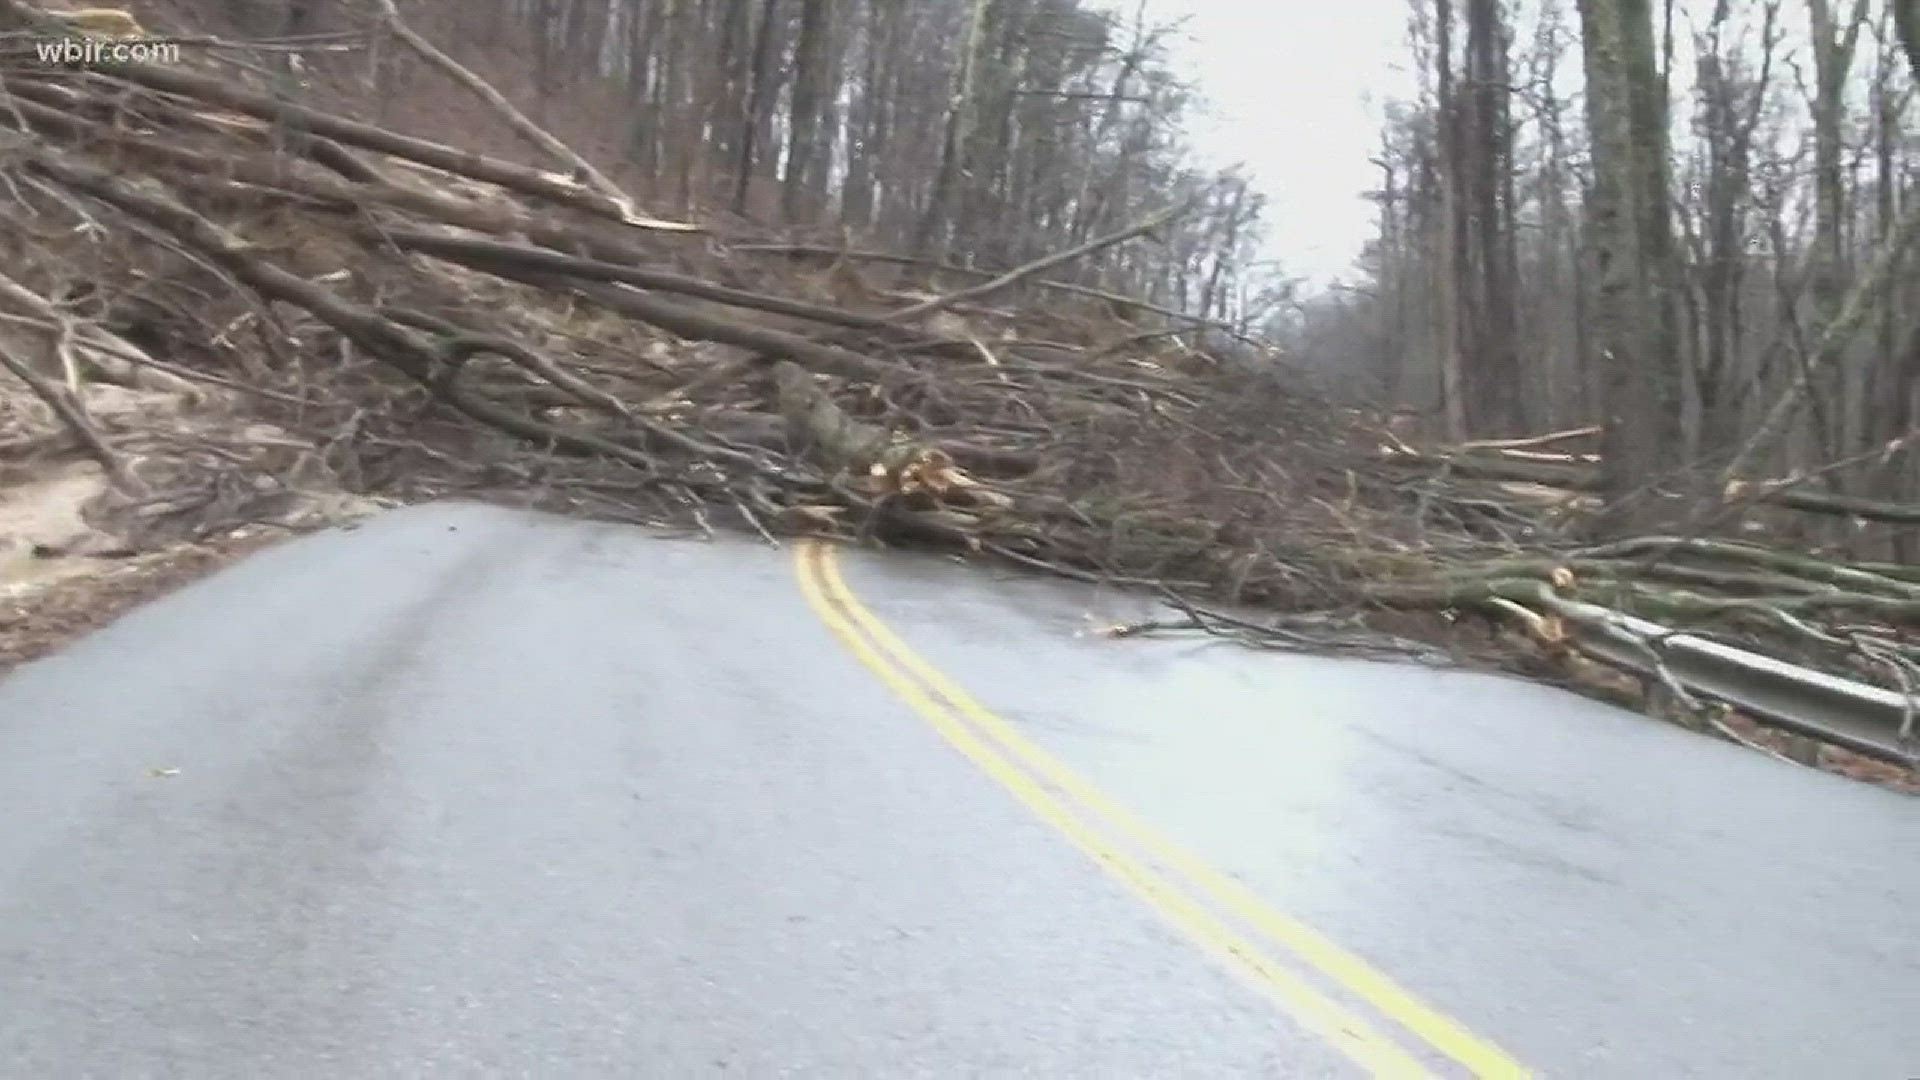 Feb. 12, 2018: After parts of East Tennessee saw a month worth of rain in just two days, experts are warning of potential risks of landslides.